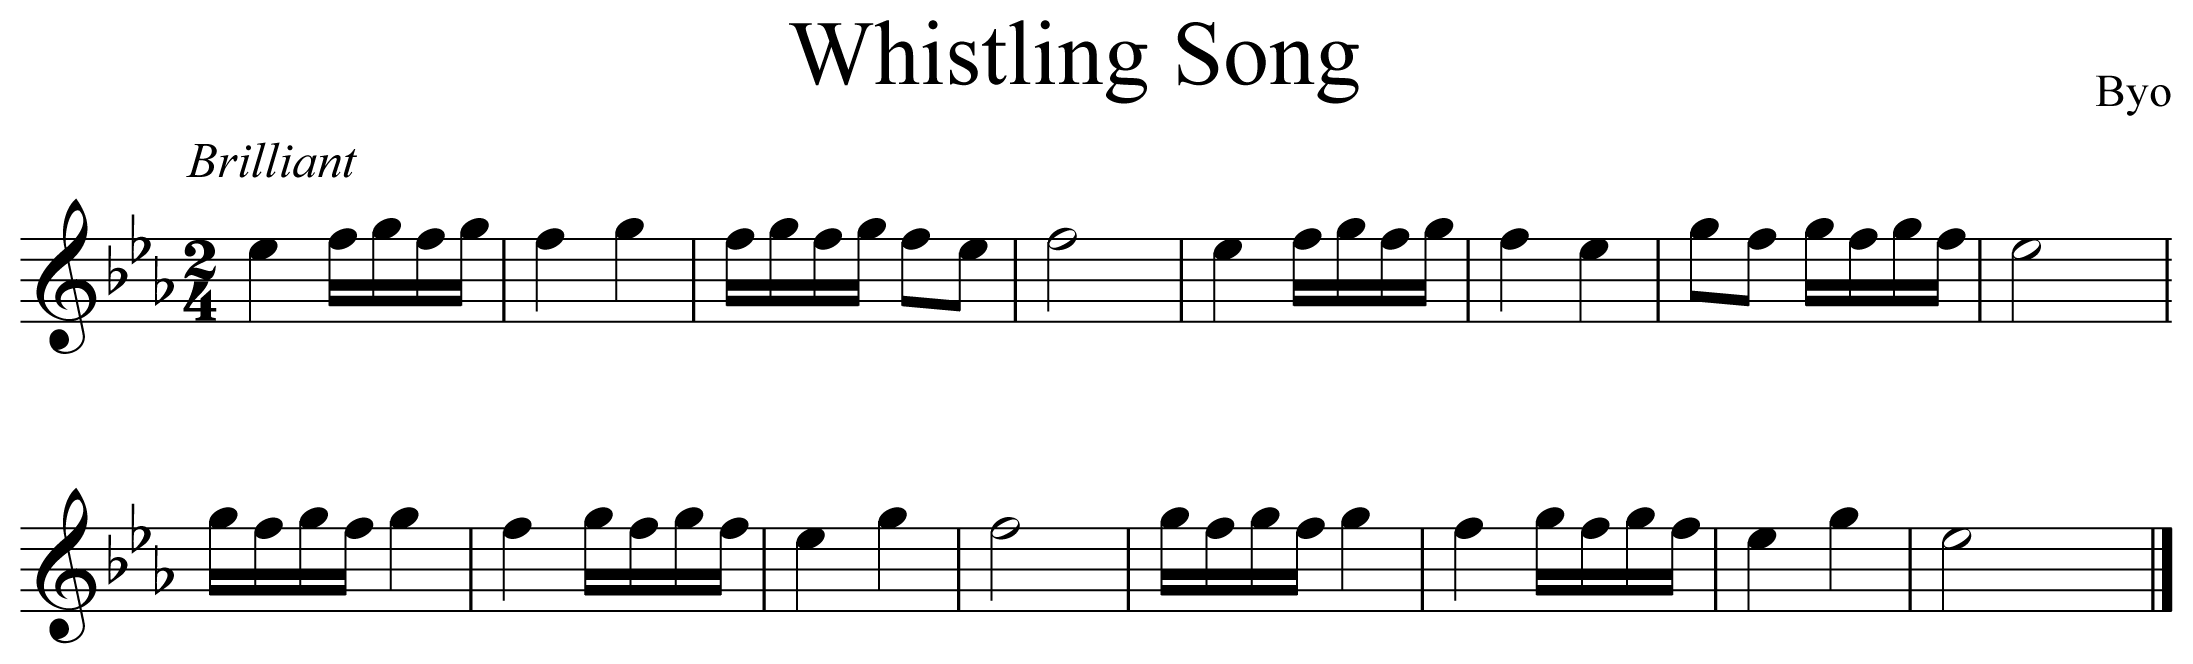 Whistling Song Music Notation Flute